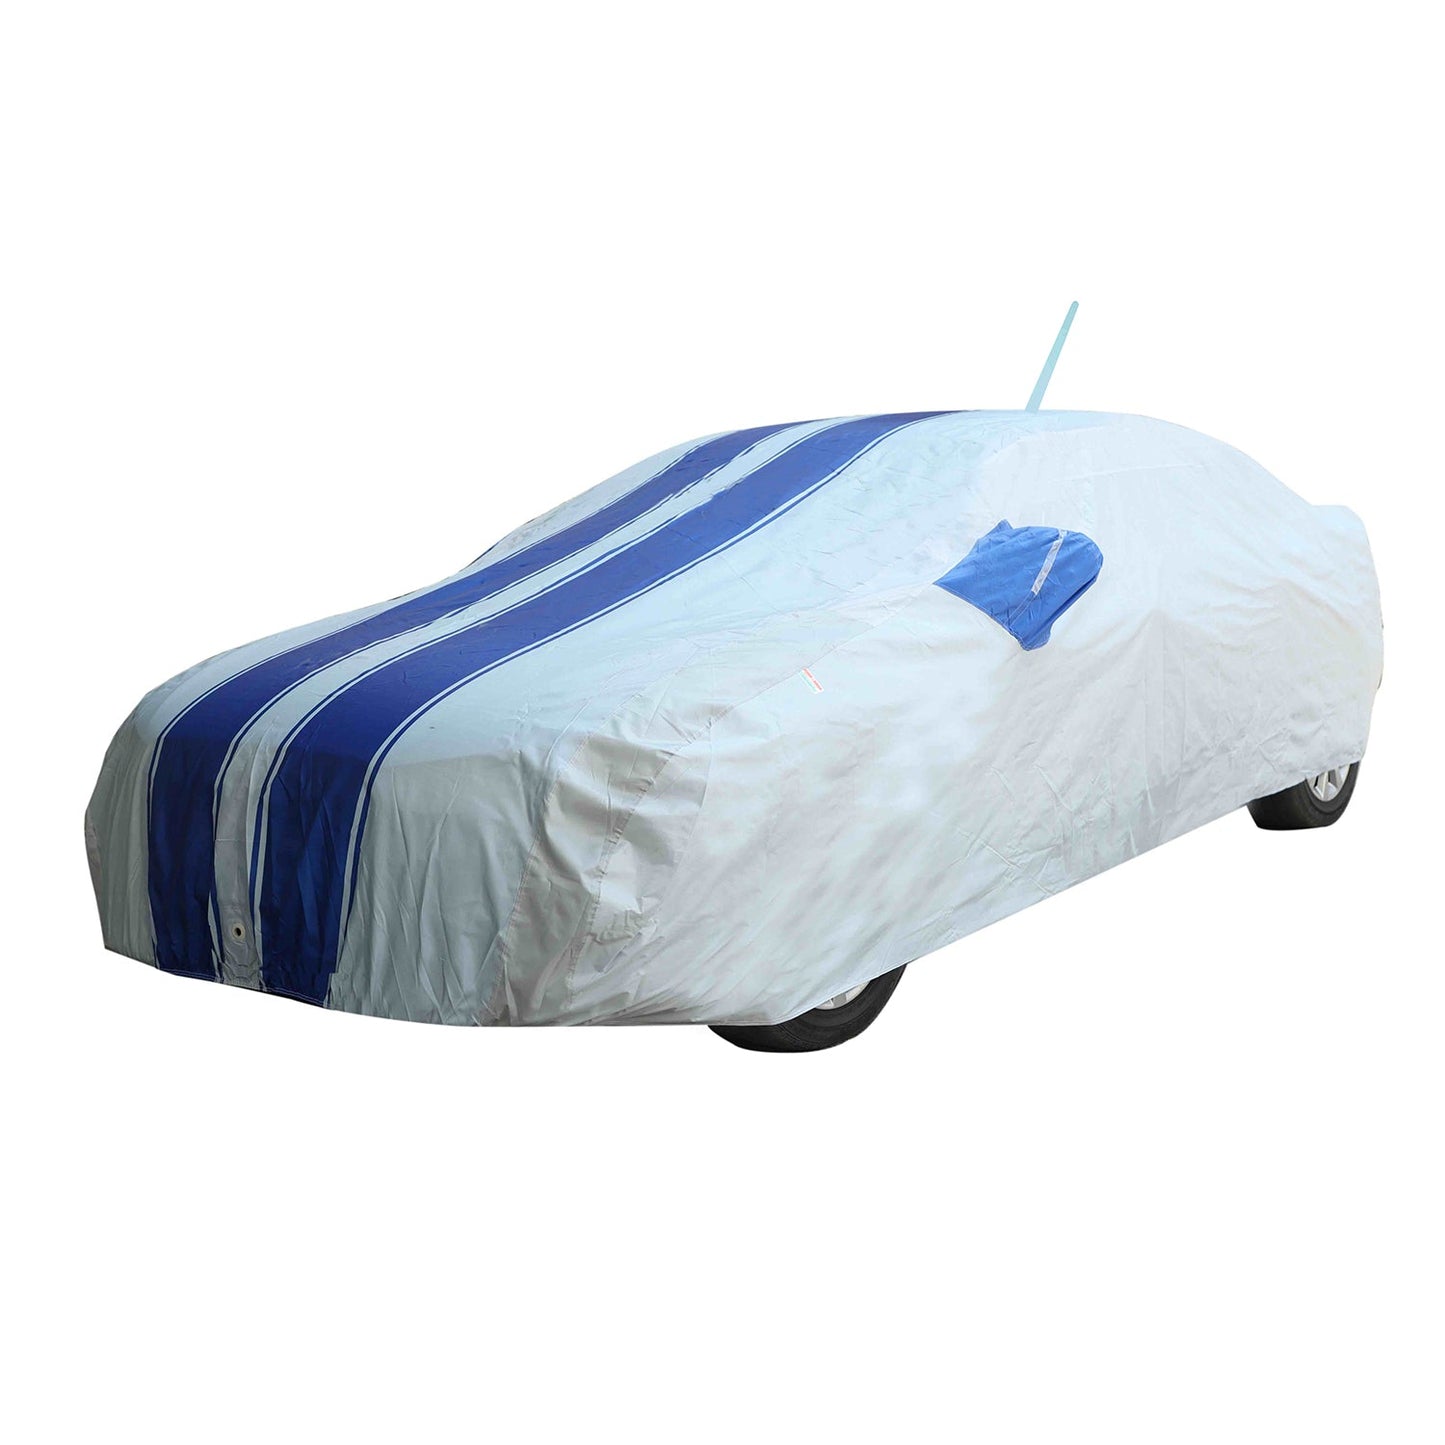 Oshotto 100% Blue dustproof and Water Resistant Car Body Cover with Mirror & Antenna Pockets For Tata Nexon